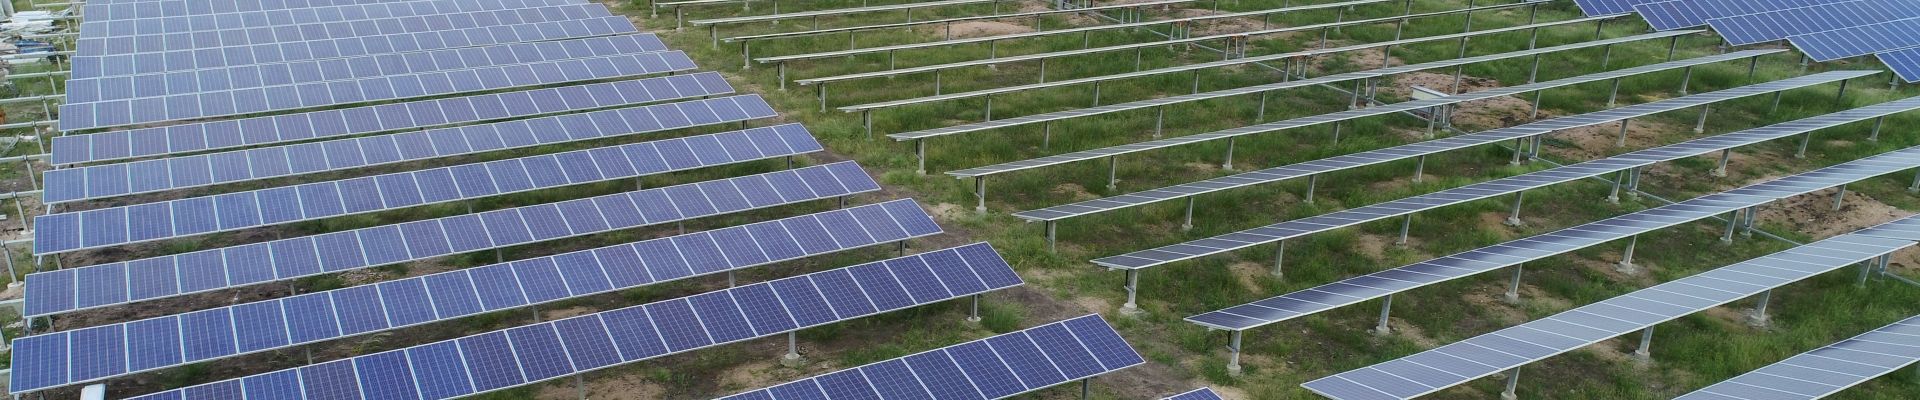 Provision of solar power forecasts for solar park in India